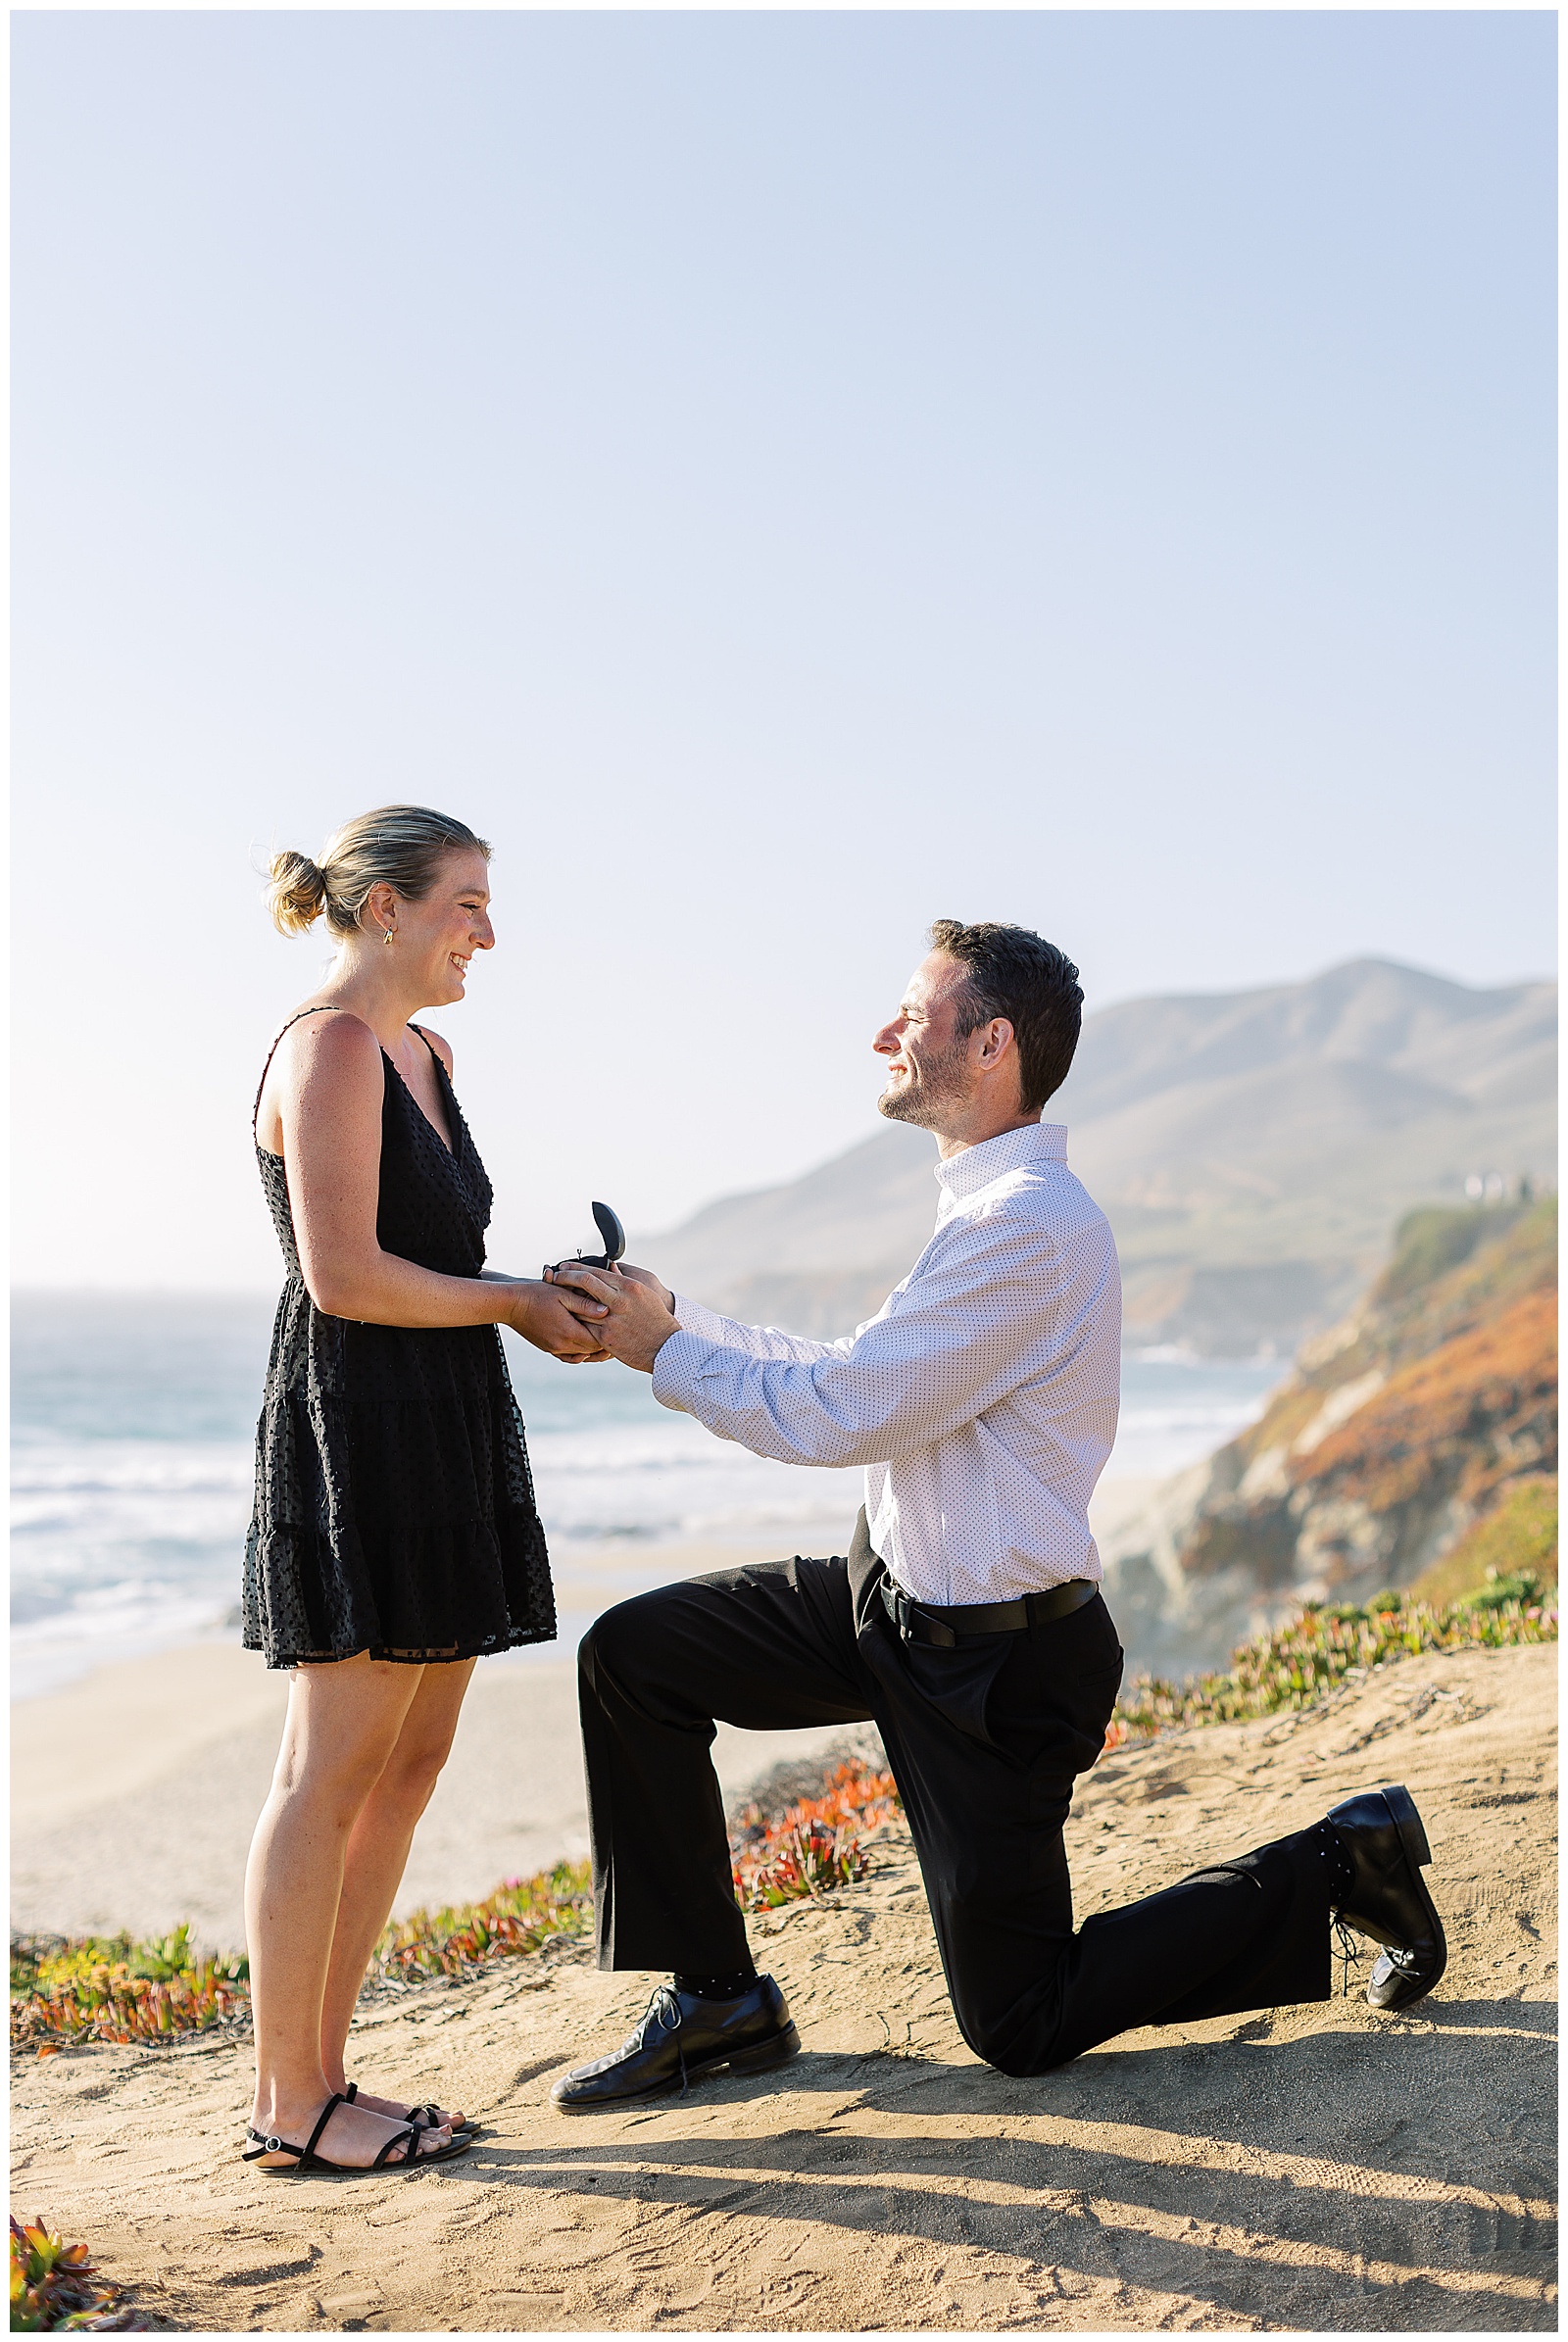 Photo of Man proposing to woman by film photographer AGS Photo Art